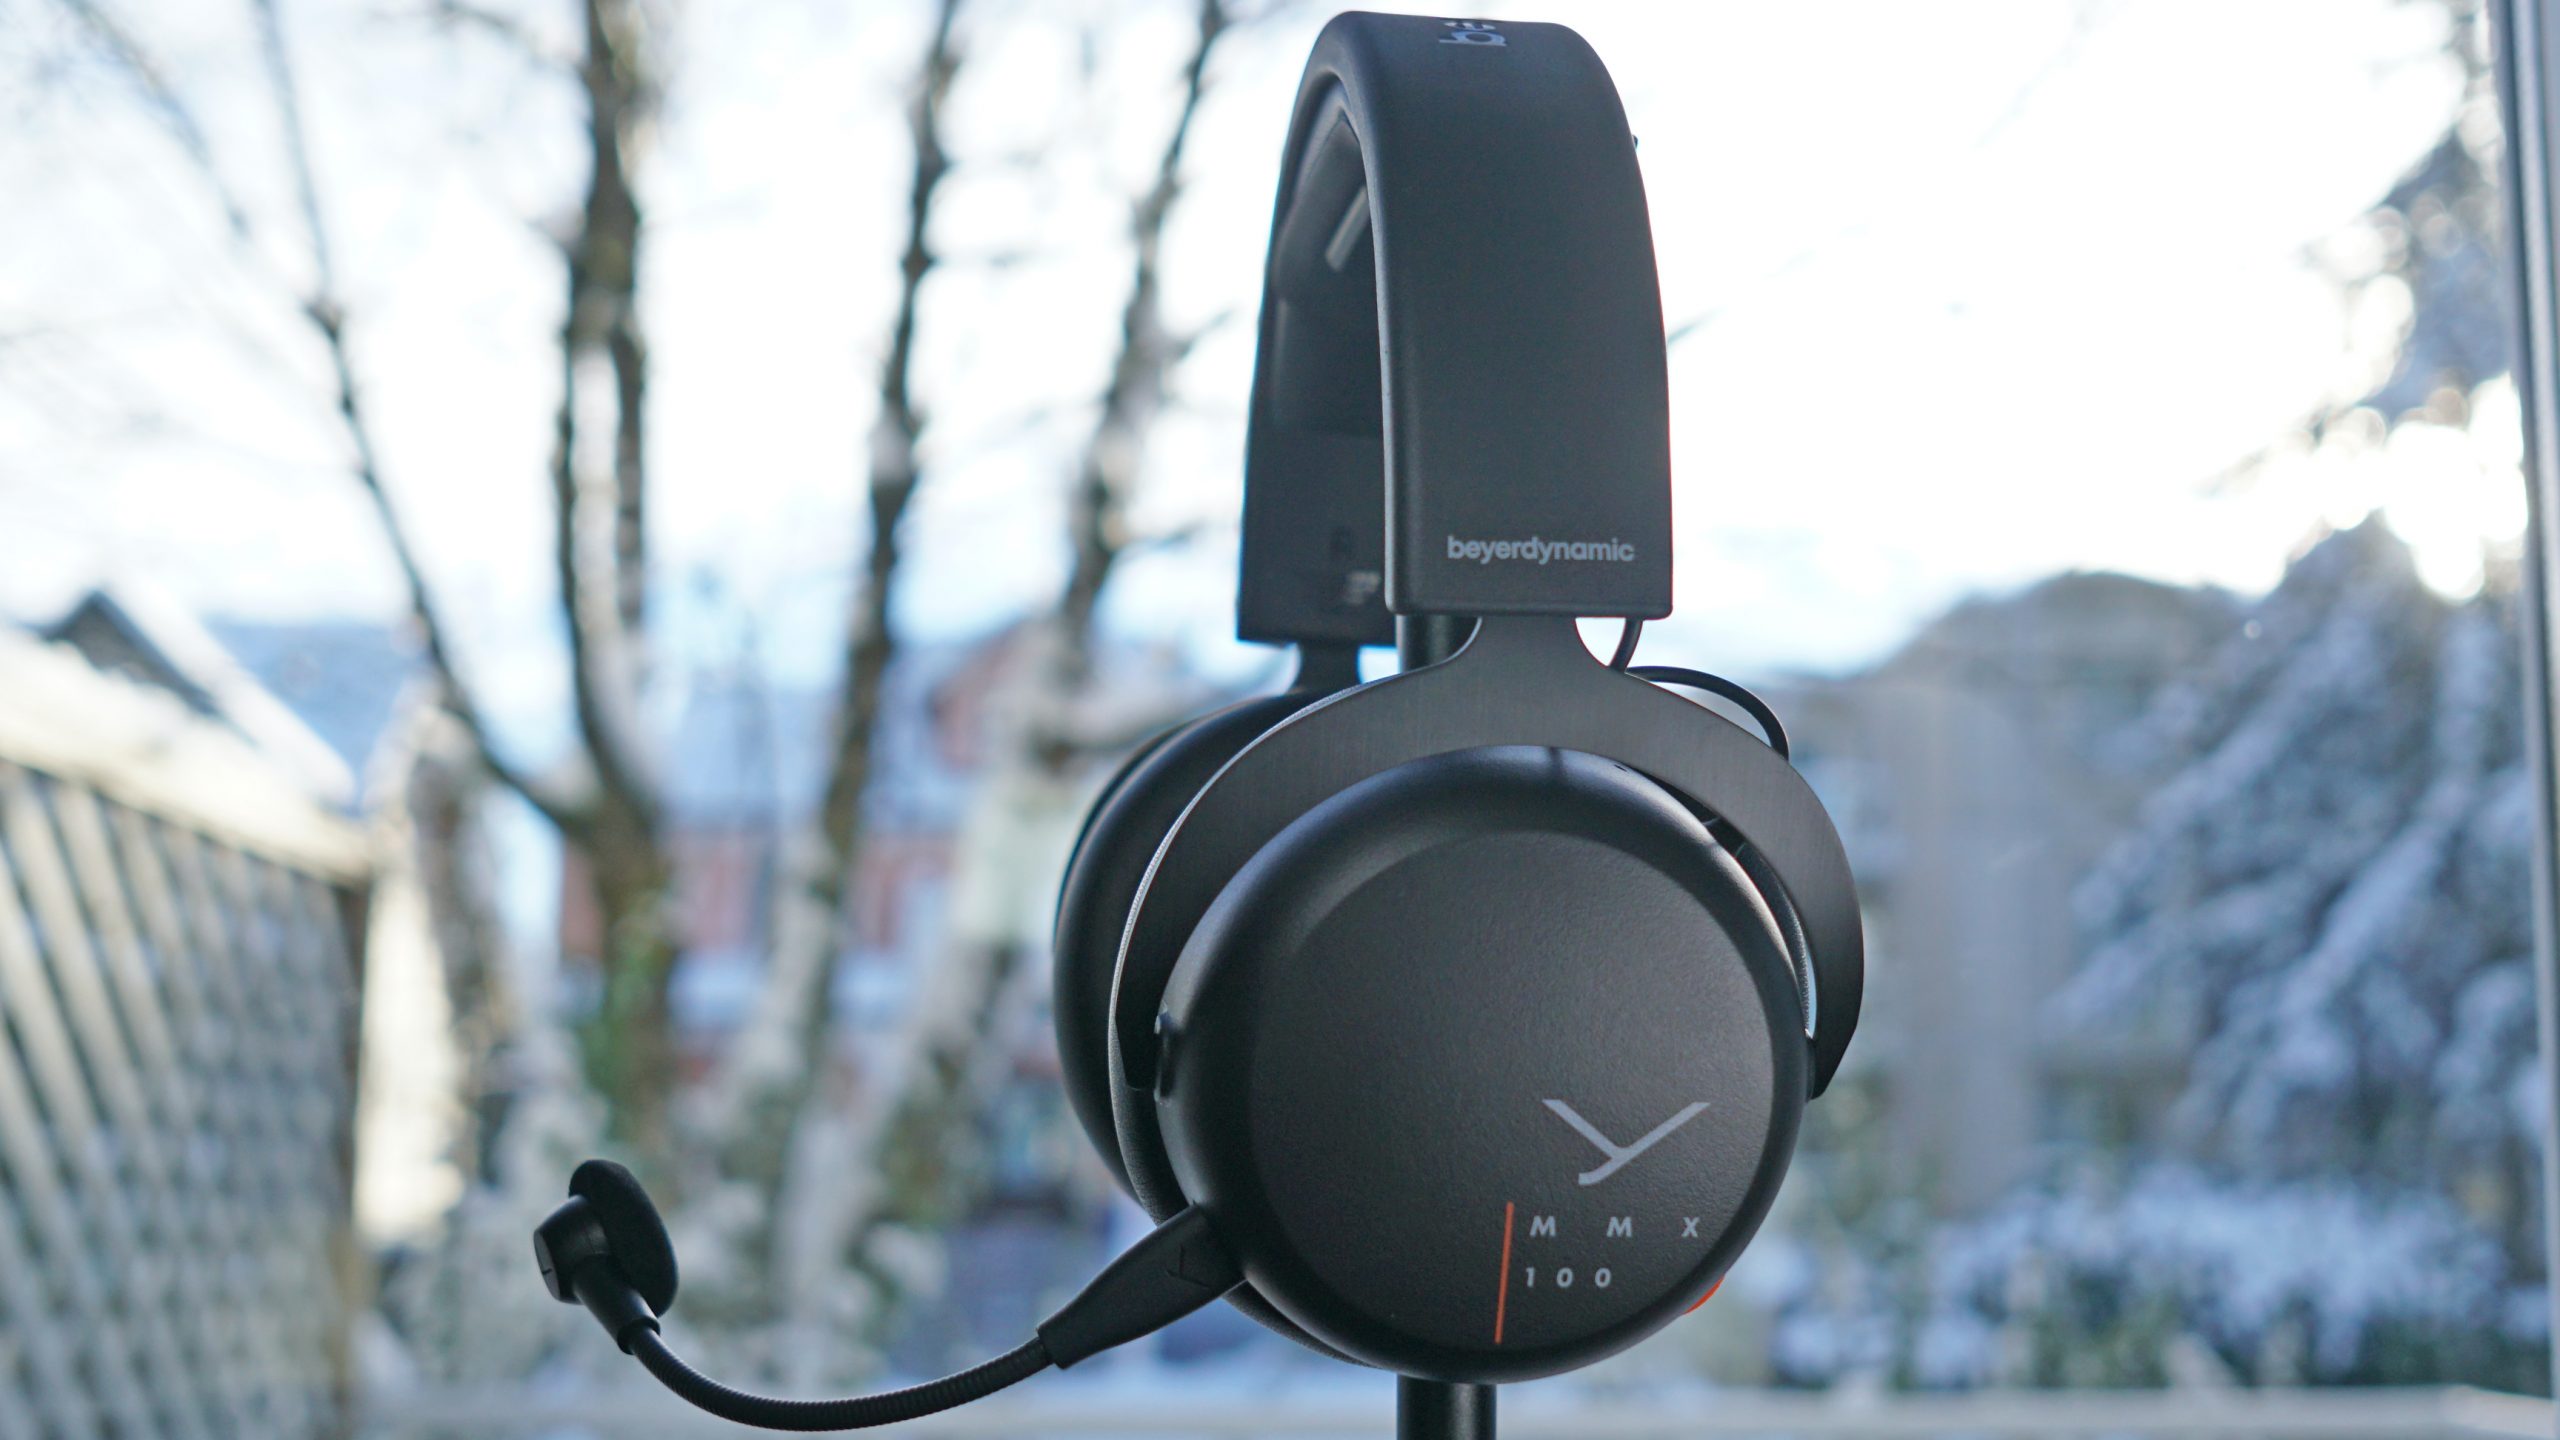 The Beyerdynamic MMX 100 gaming headset sits on a headphone stand in front of a window.